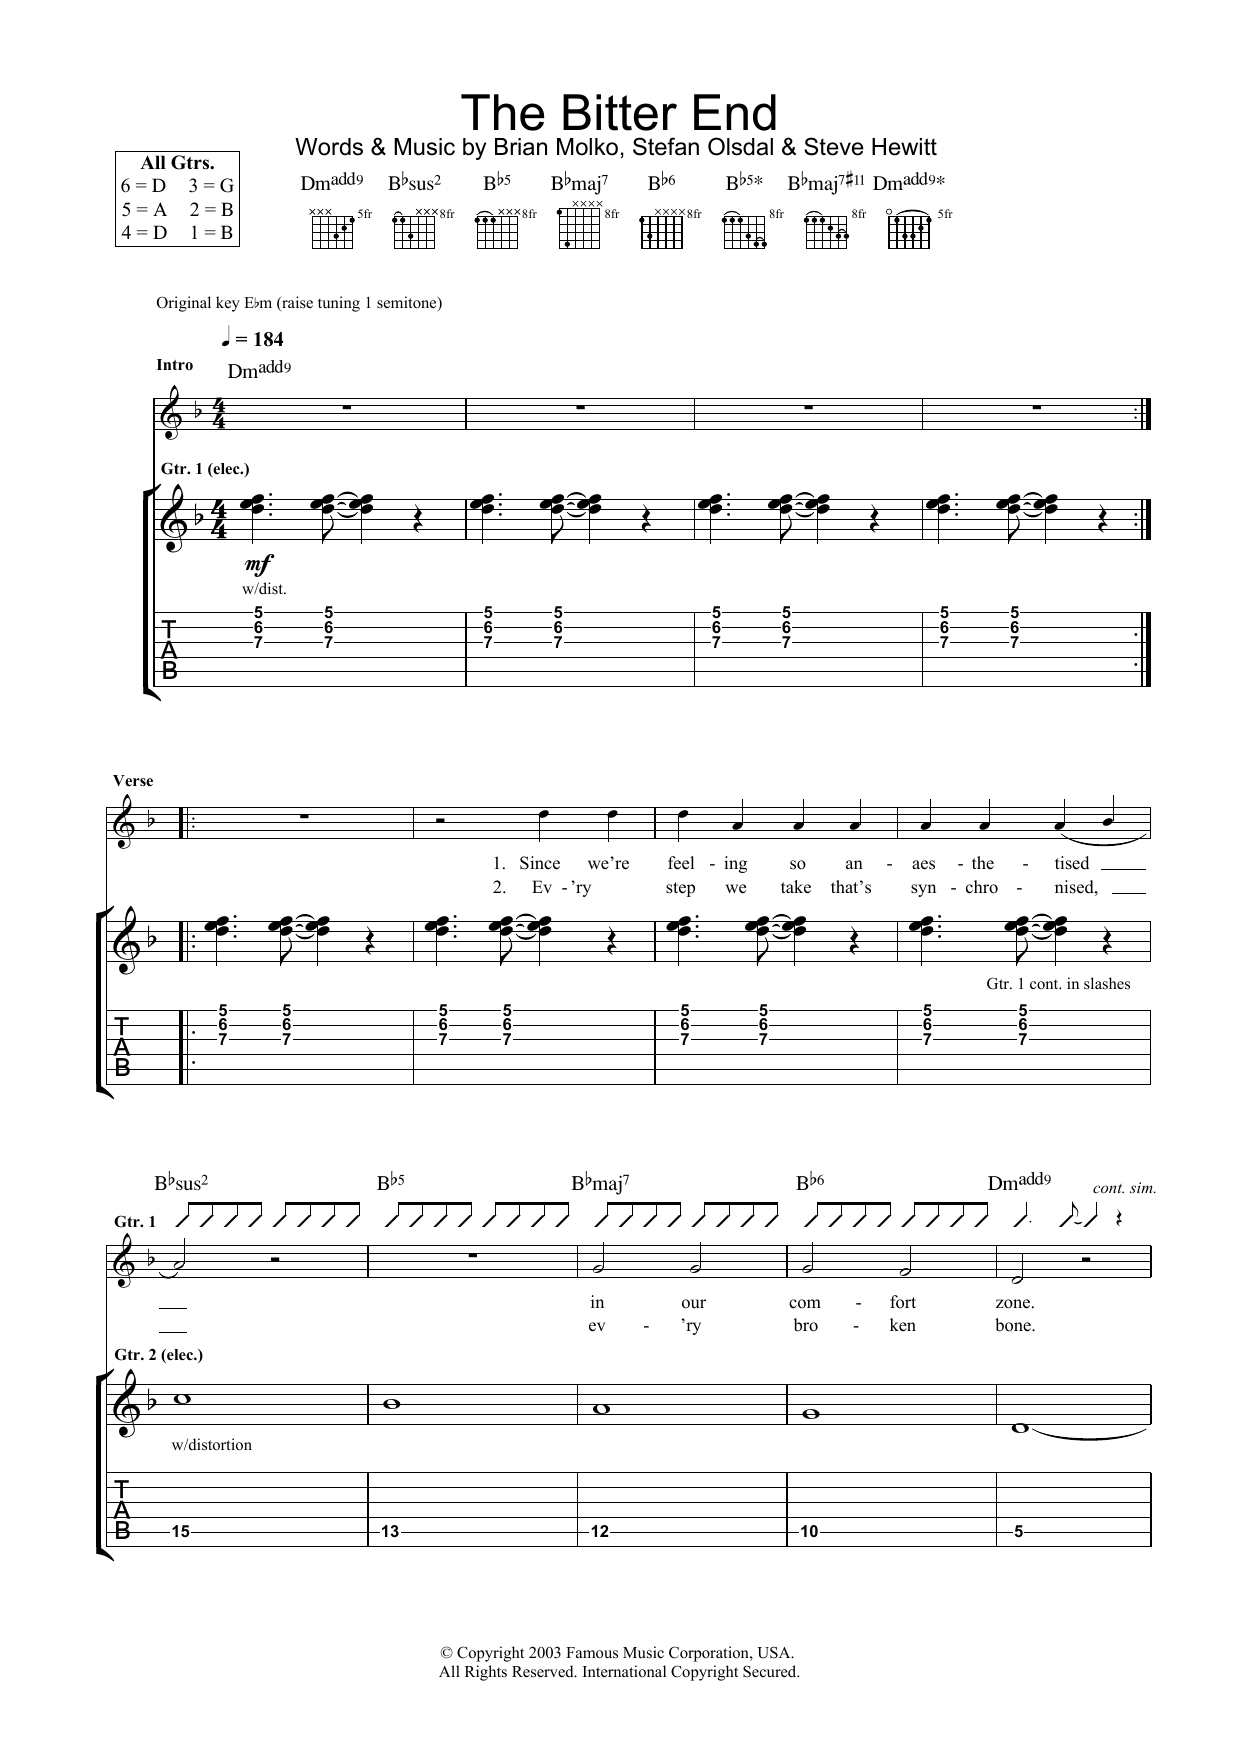 Placebo The Bitter End sheet music notes and chords. Download Printable PDF.